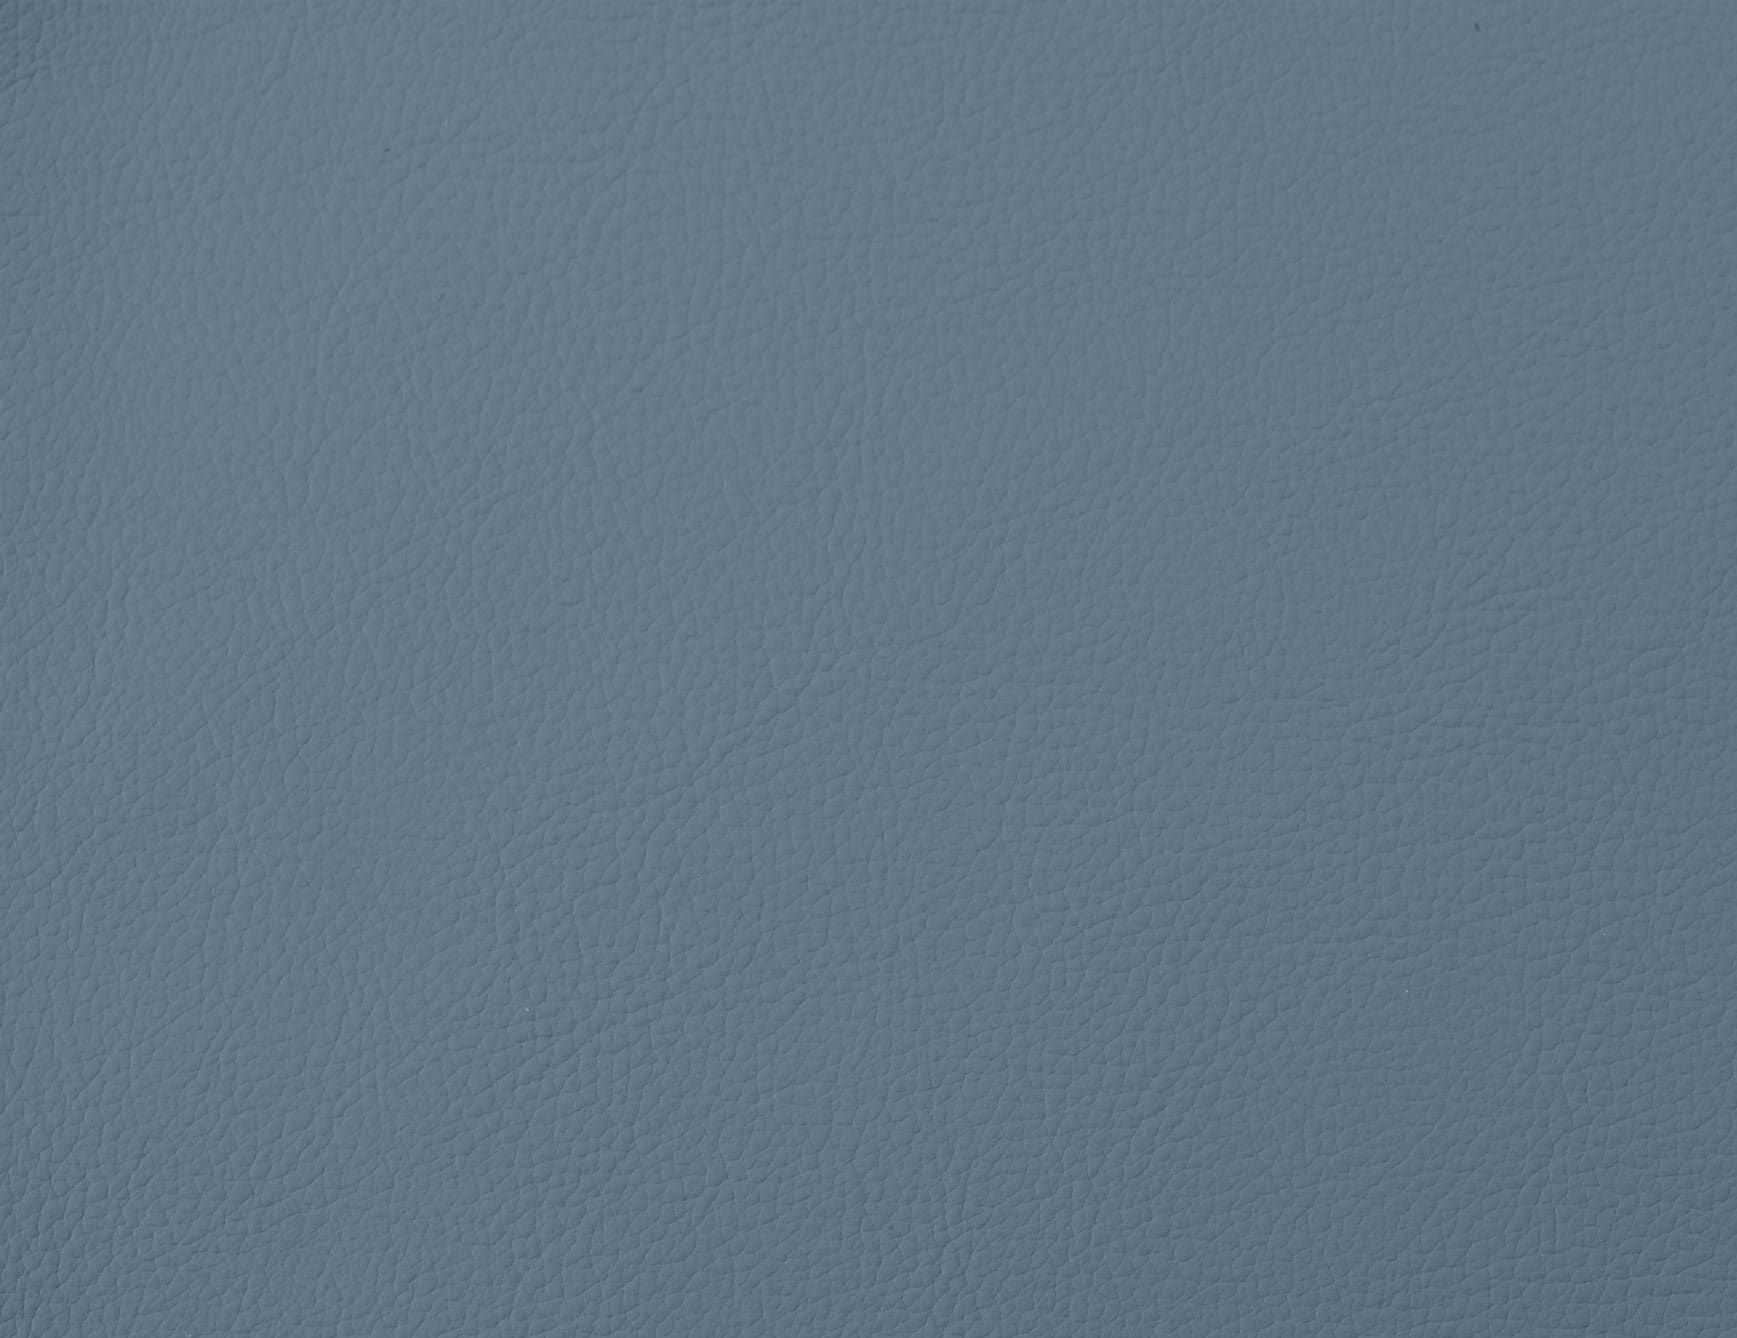 Avio contemporary Italian upholstery leather in blue